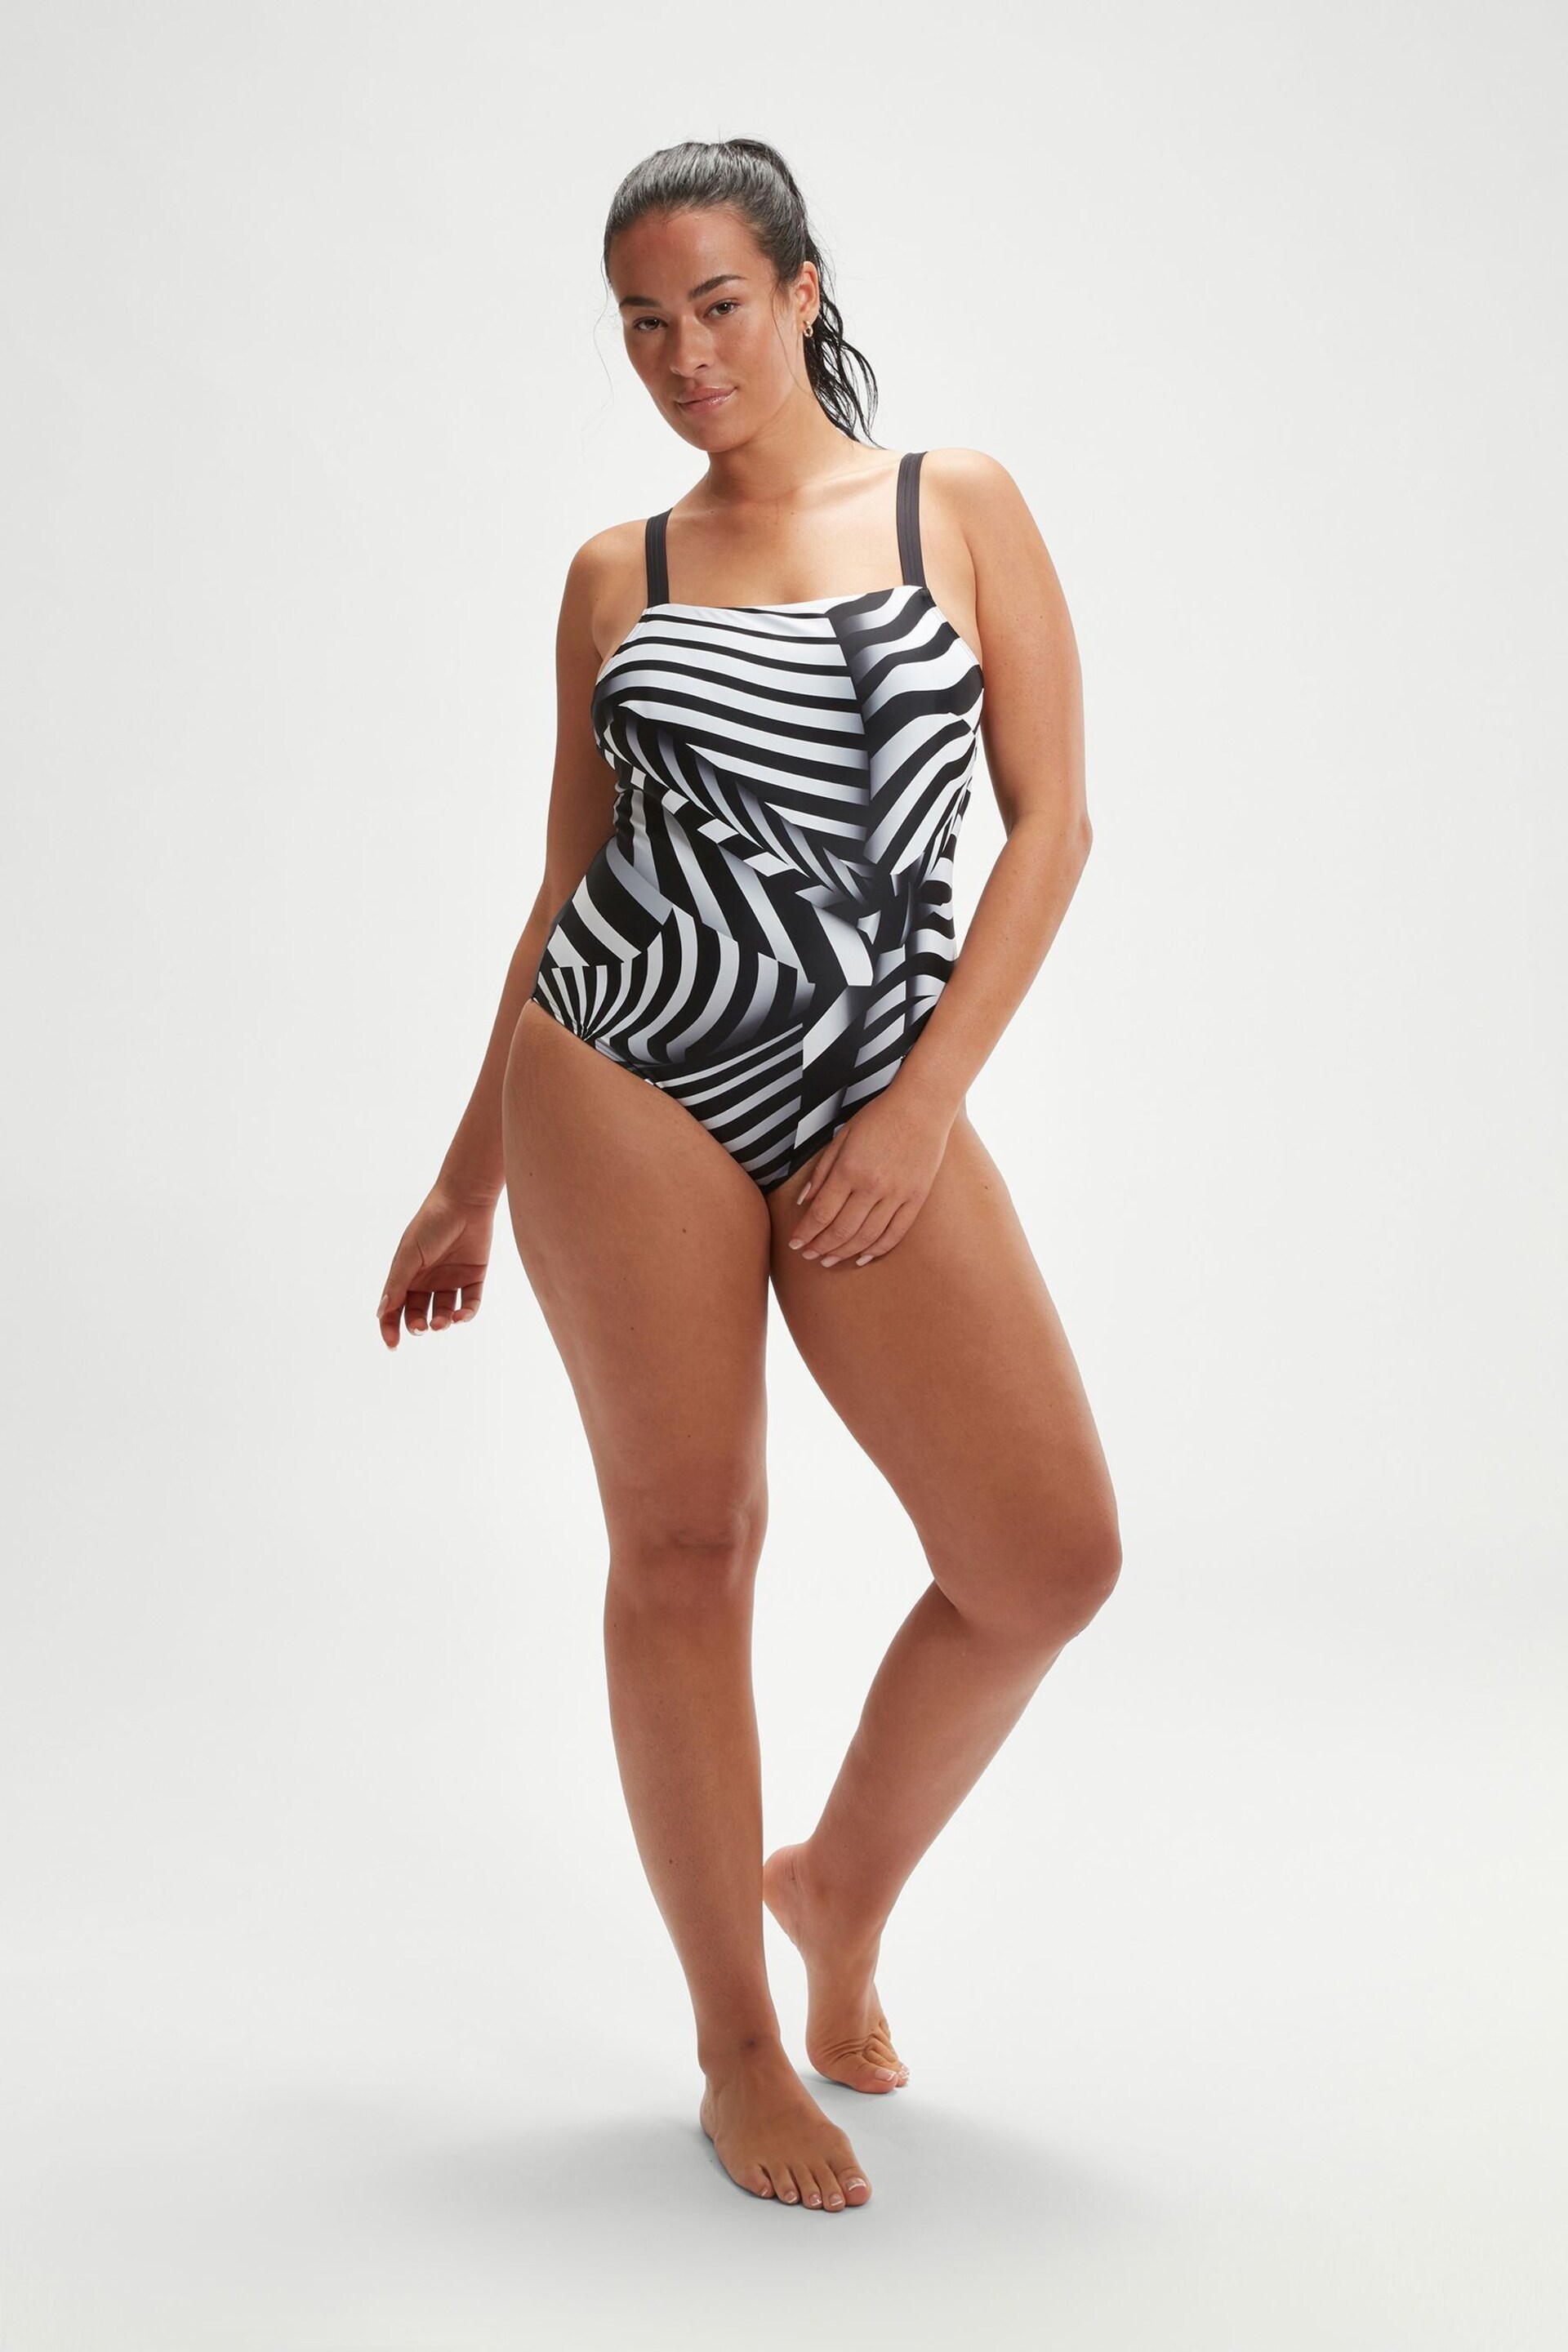 Speedo Womens Amberglow Shaping One Piece Swimsuit with Removable Bra Pads and Bust Support - Image 4 of 6